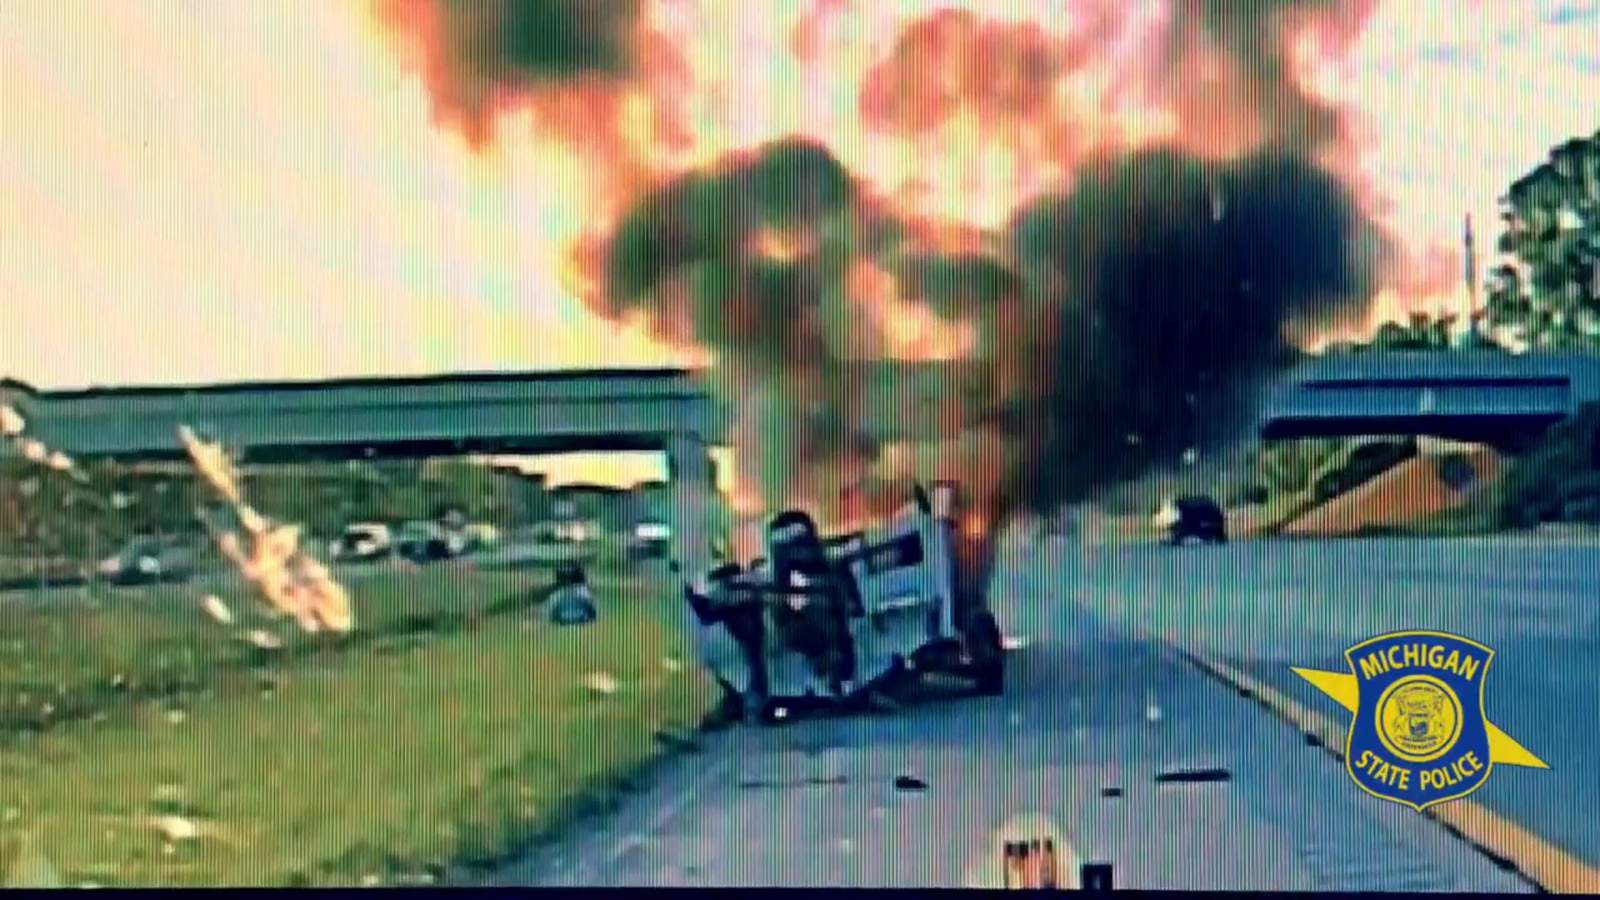 Video shows Michigan state trooper rescue unconscious driver from burning vehicle on I-94